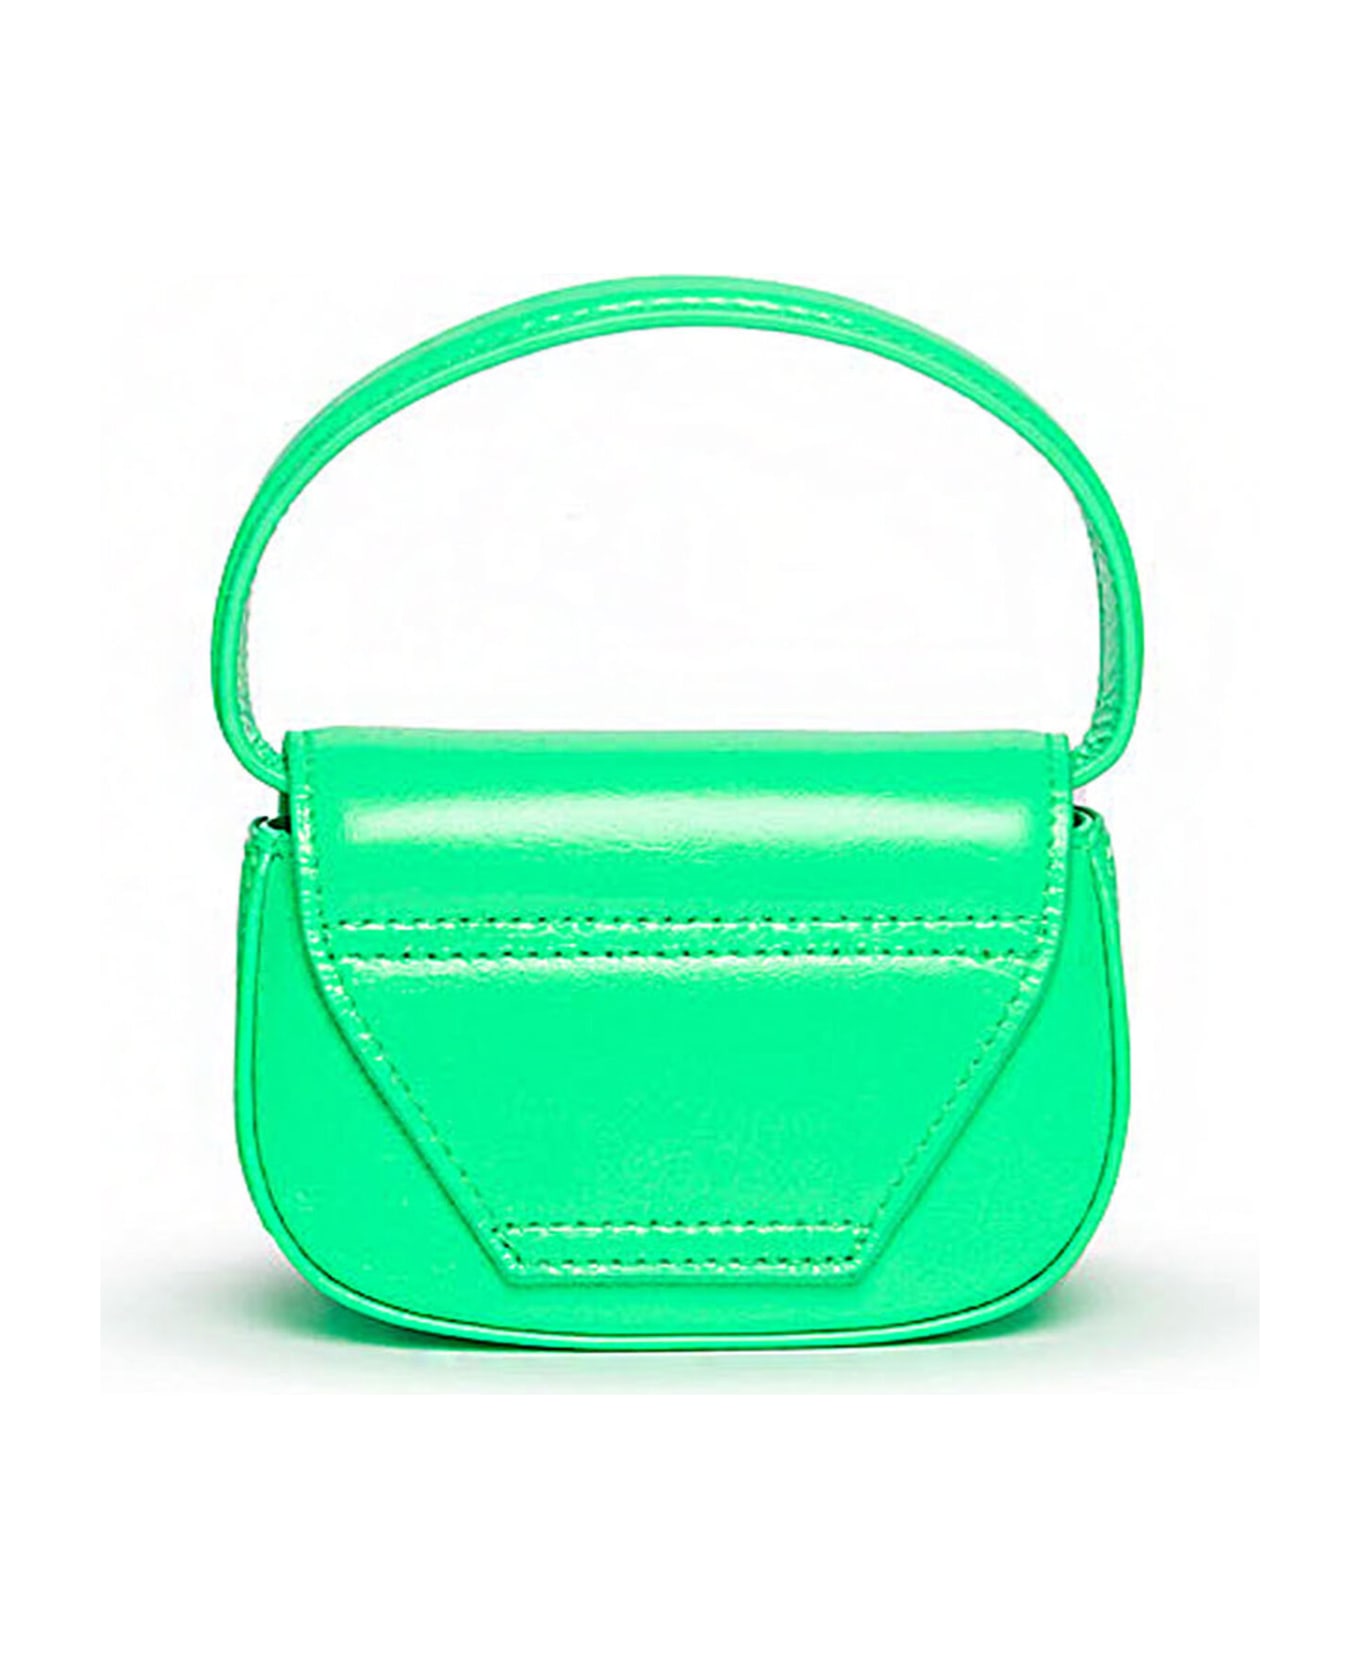 Diesel 1dr Xs Bags Diesel 1dr Xs Bag In Fluo Imitation Leather - Green アクセサリー＆ギフト